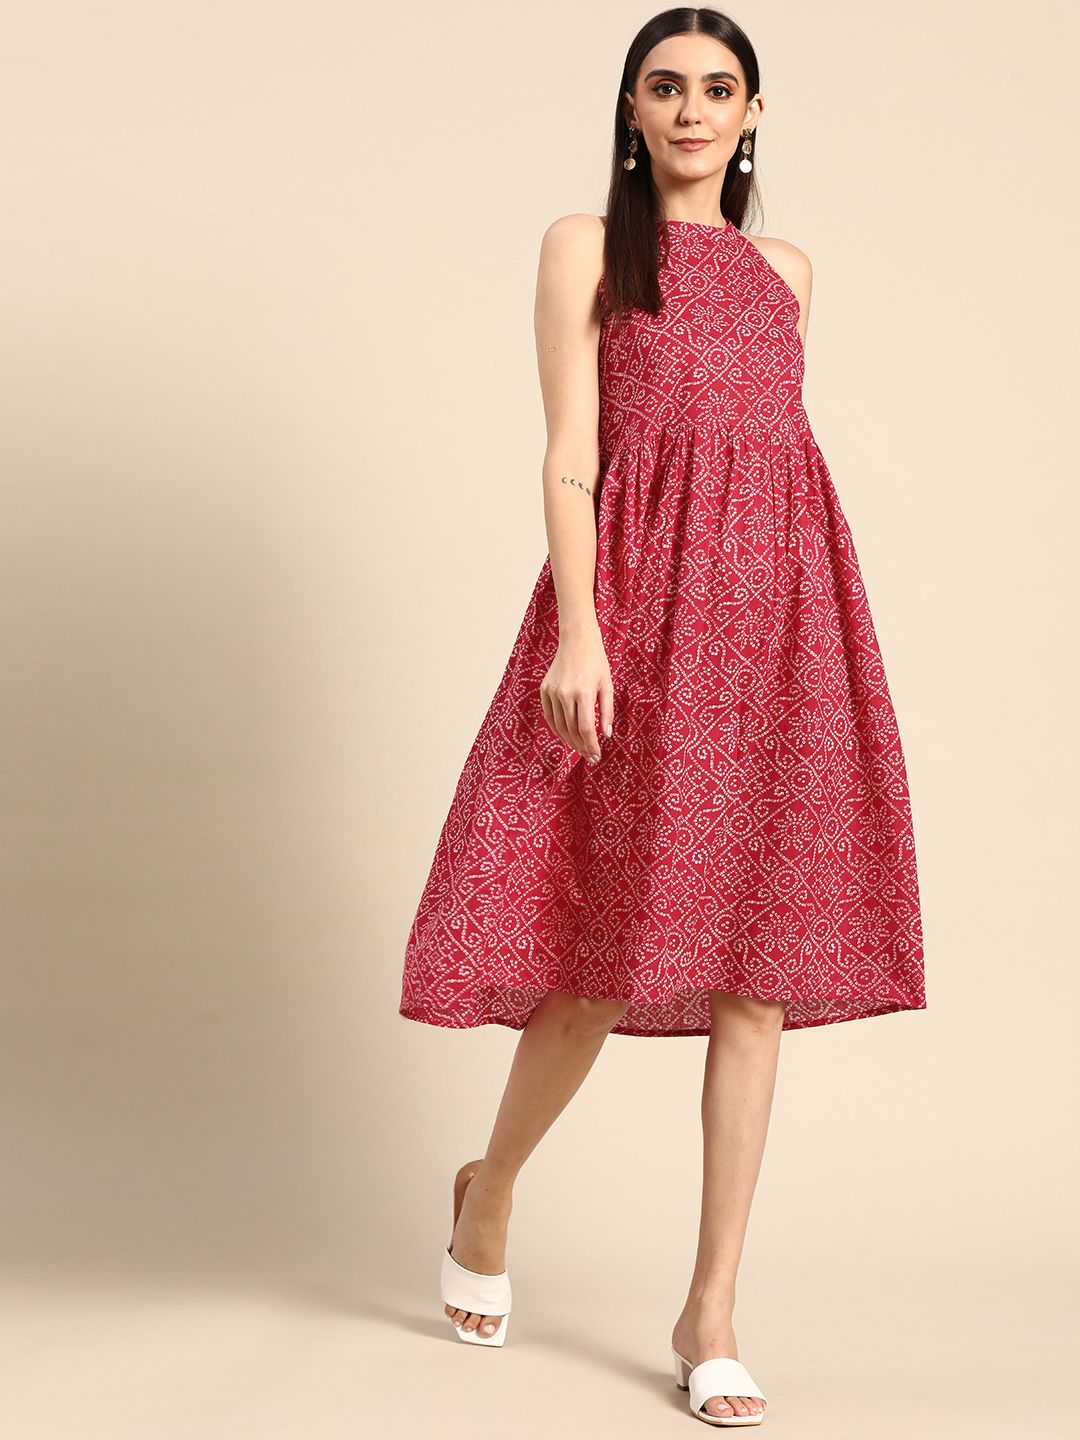 Anouk Pink & White Bandhani Printed Ethnic Pure Cotton A-Line Dress with Gathers Price in India